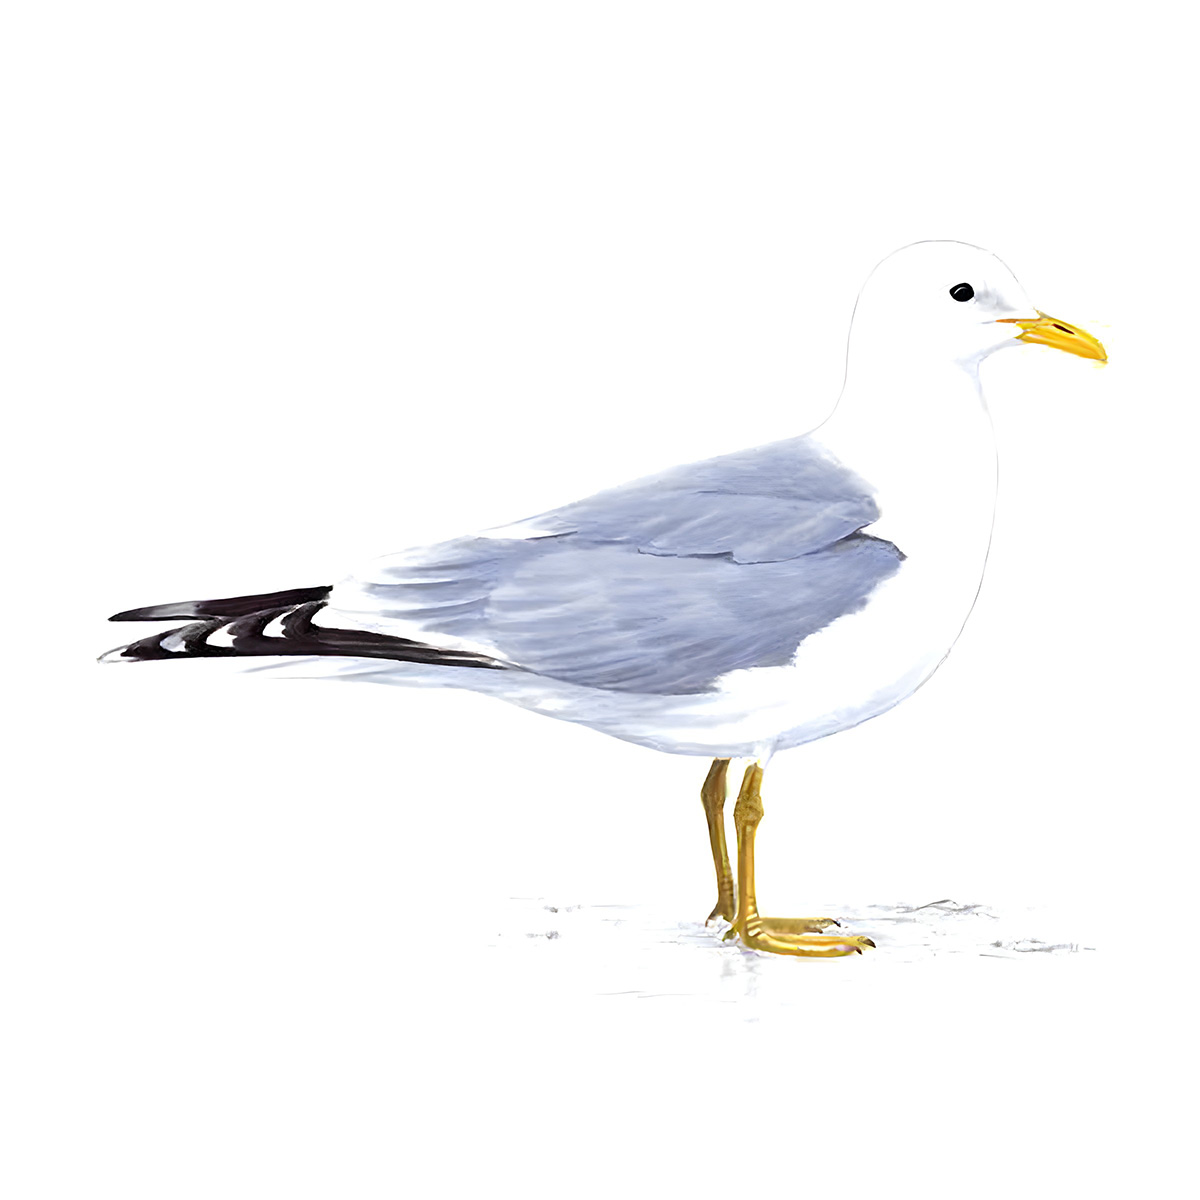 An illustration of a Common Gull. Image Credit: RSPB.